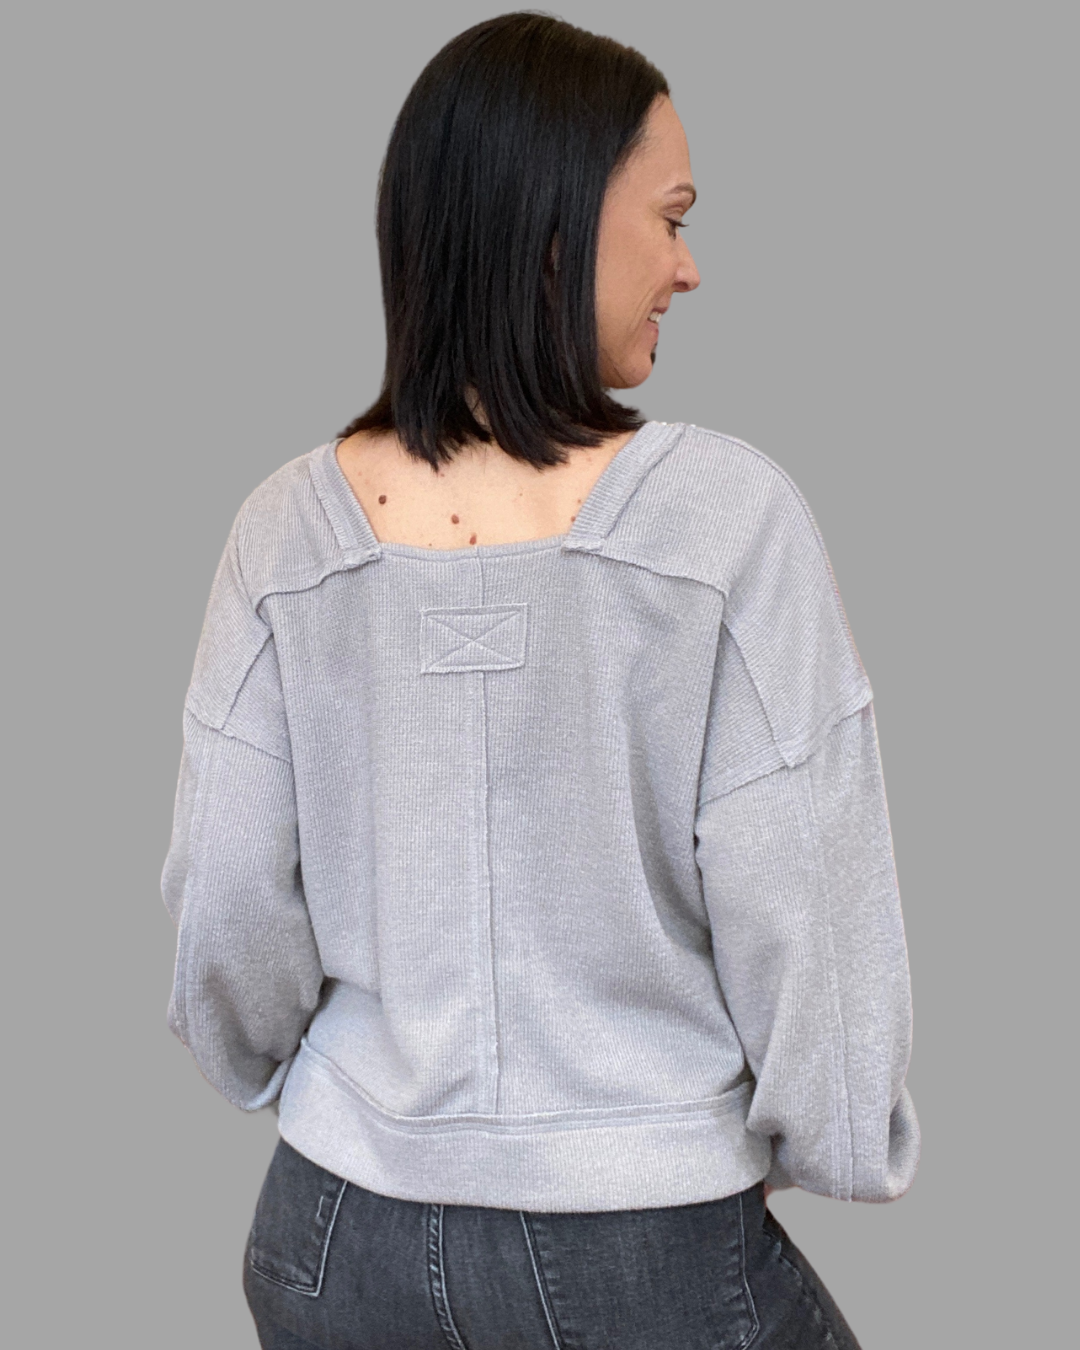 Lola Waffle Knit Top in Gray